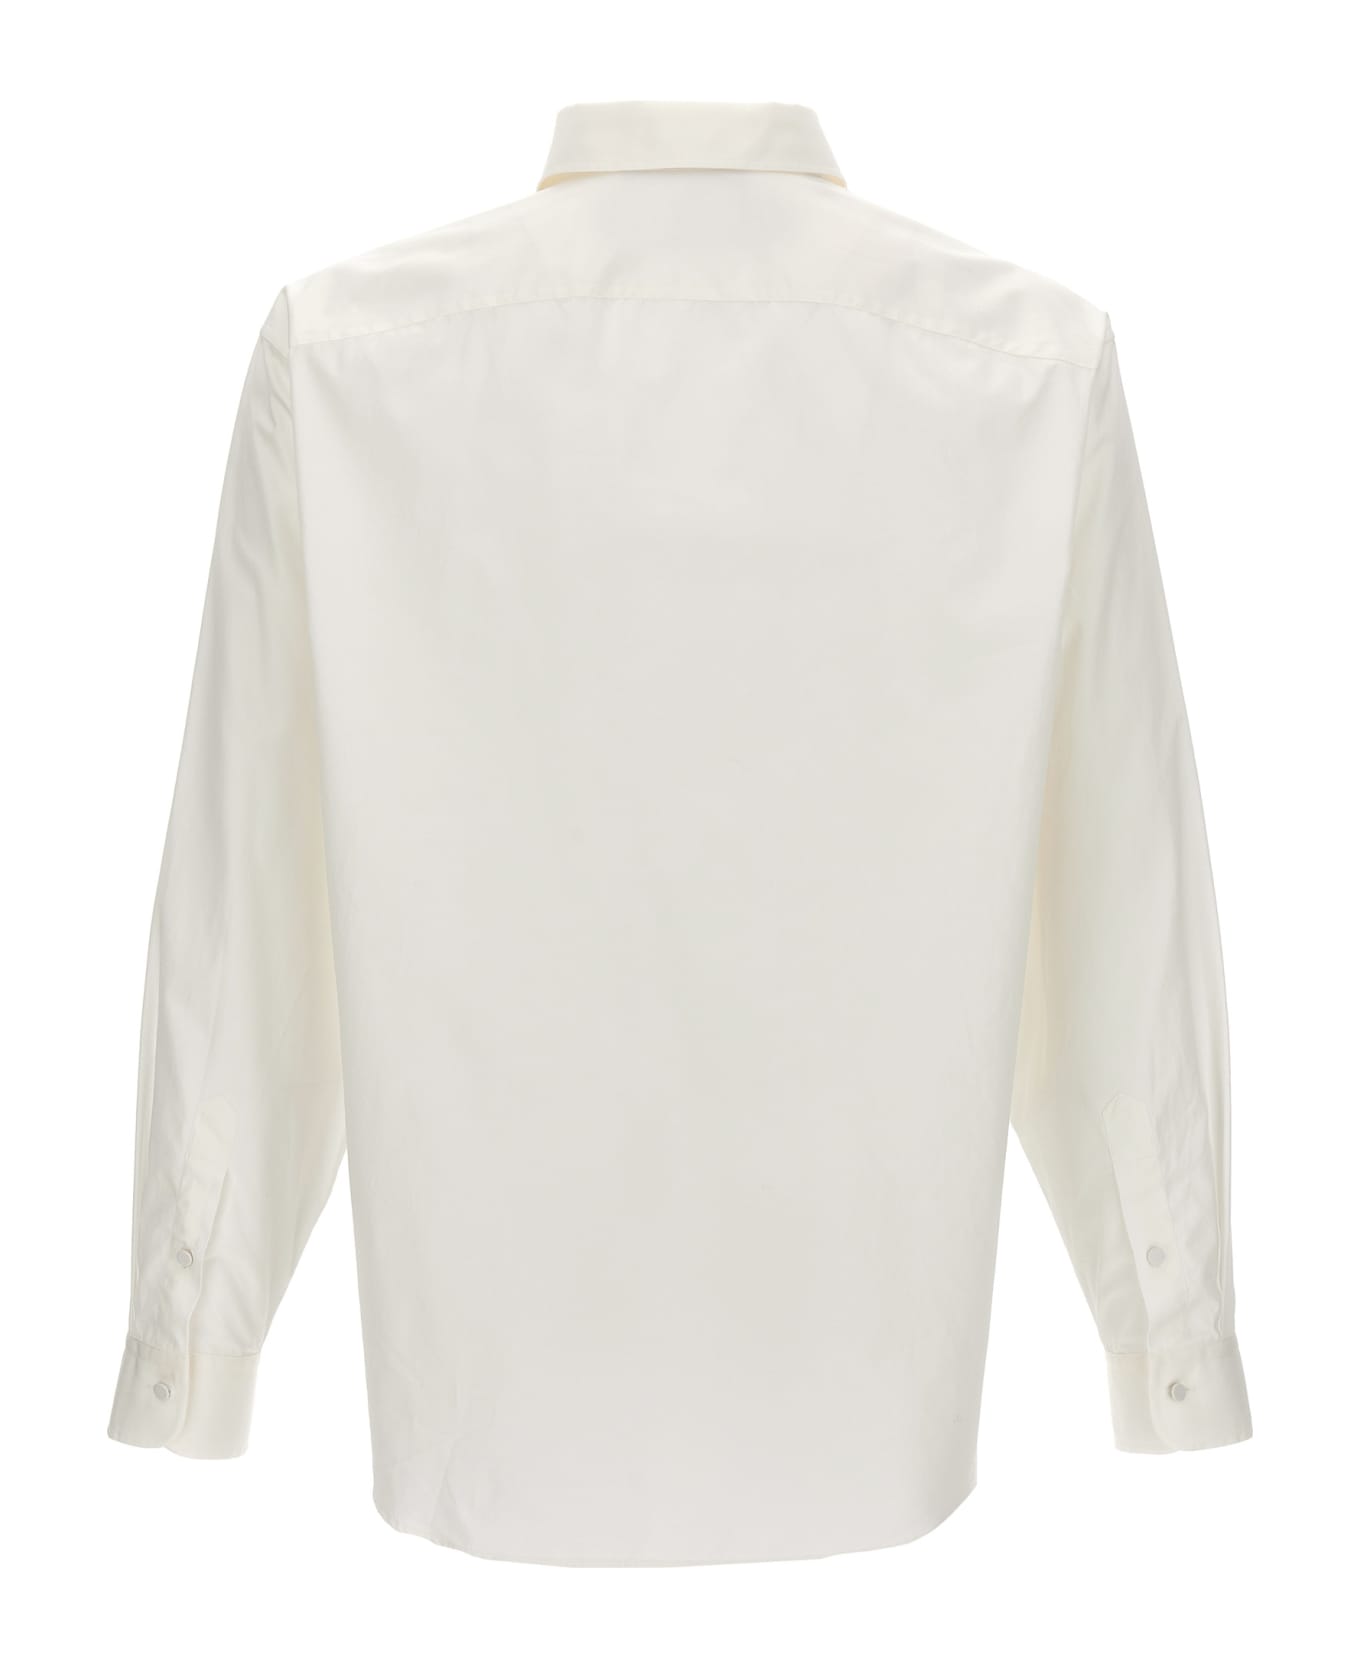 Gucci Pleated Plastron Shirt - White